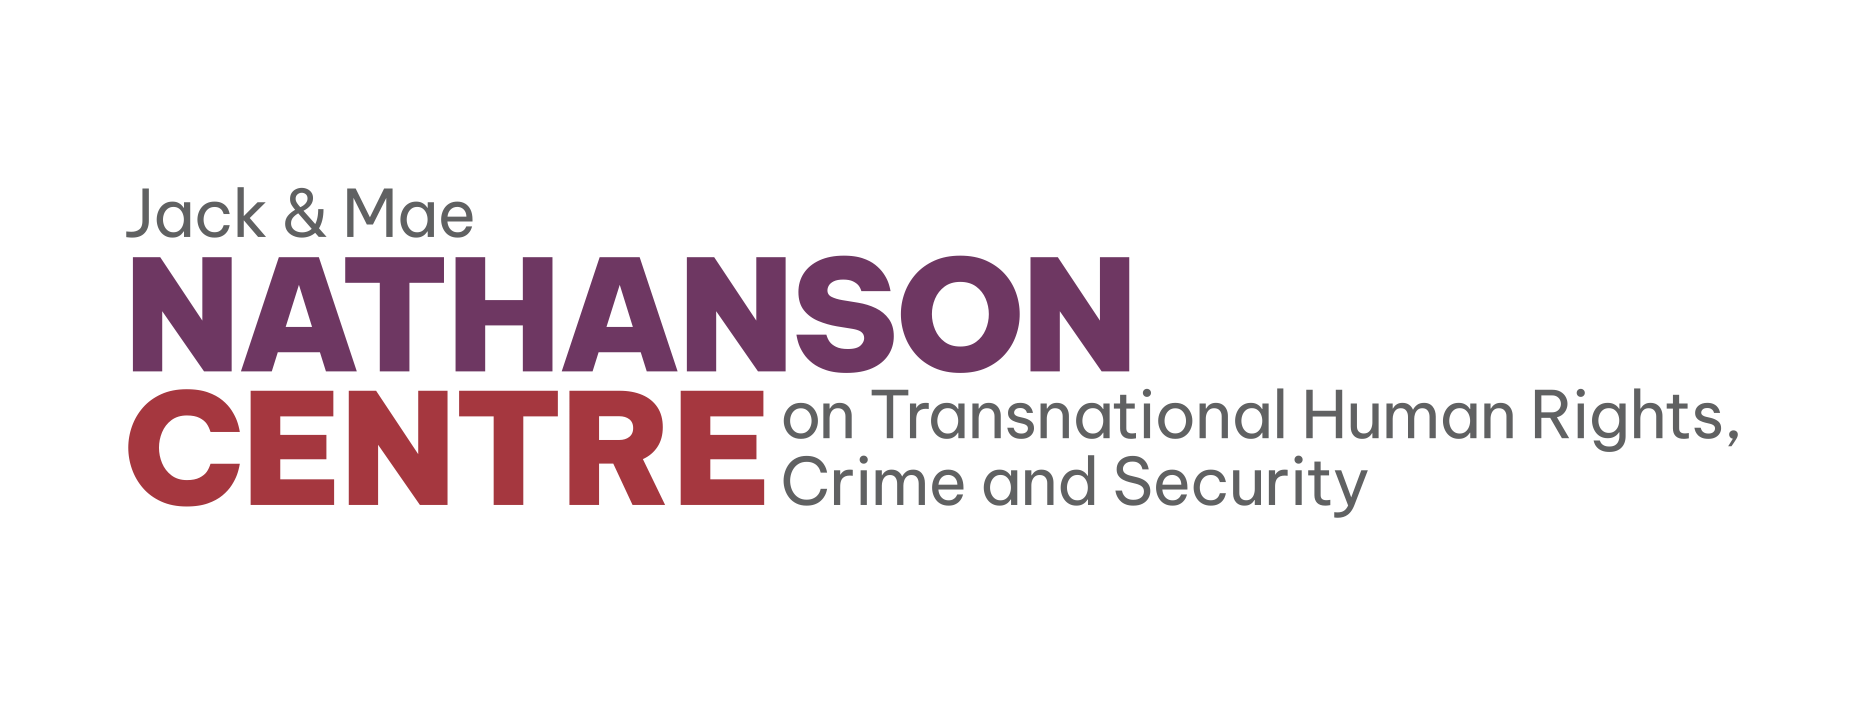 Jack and Mae Nathanson Centre on Transnational Human Rights, Crime and Security